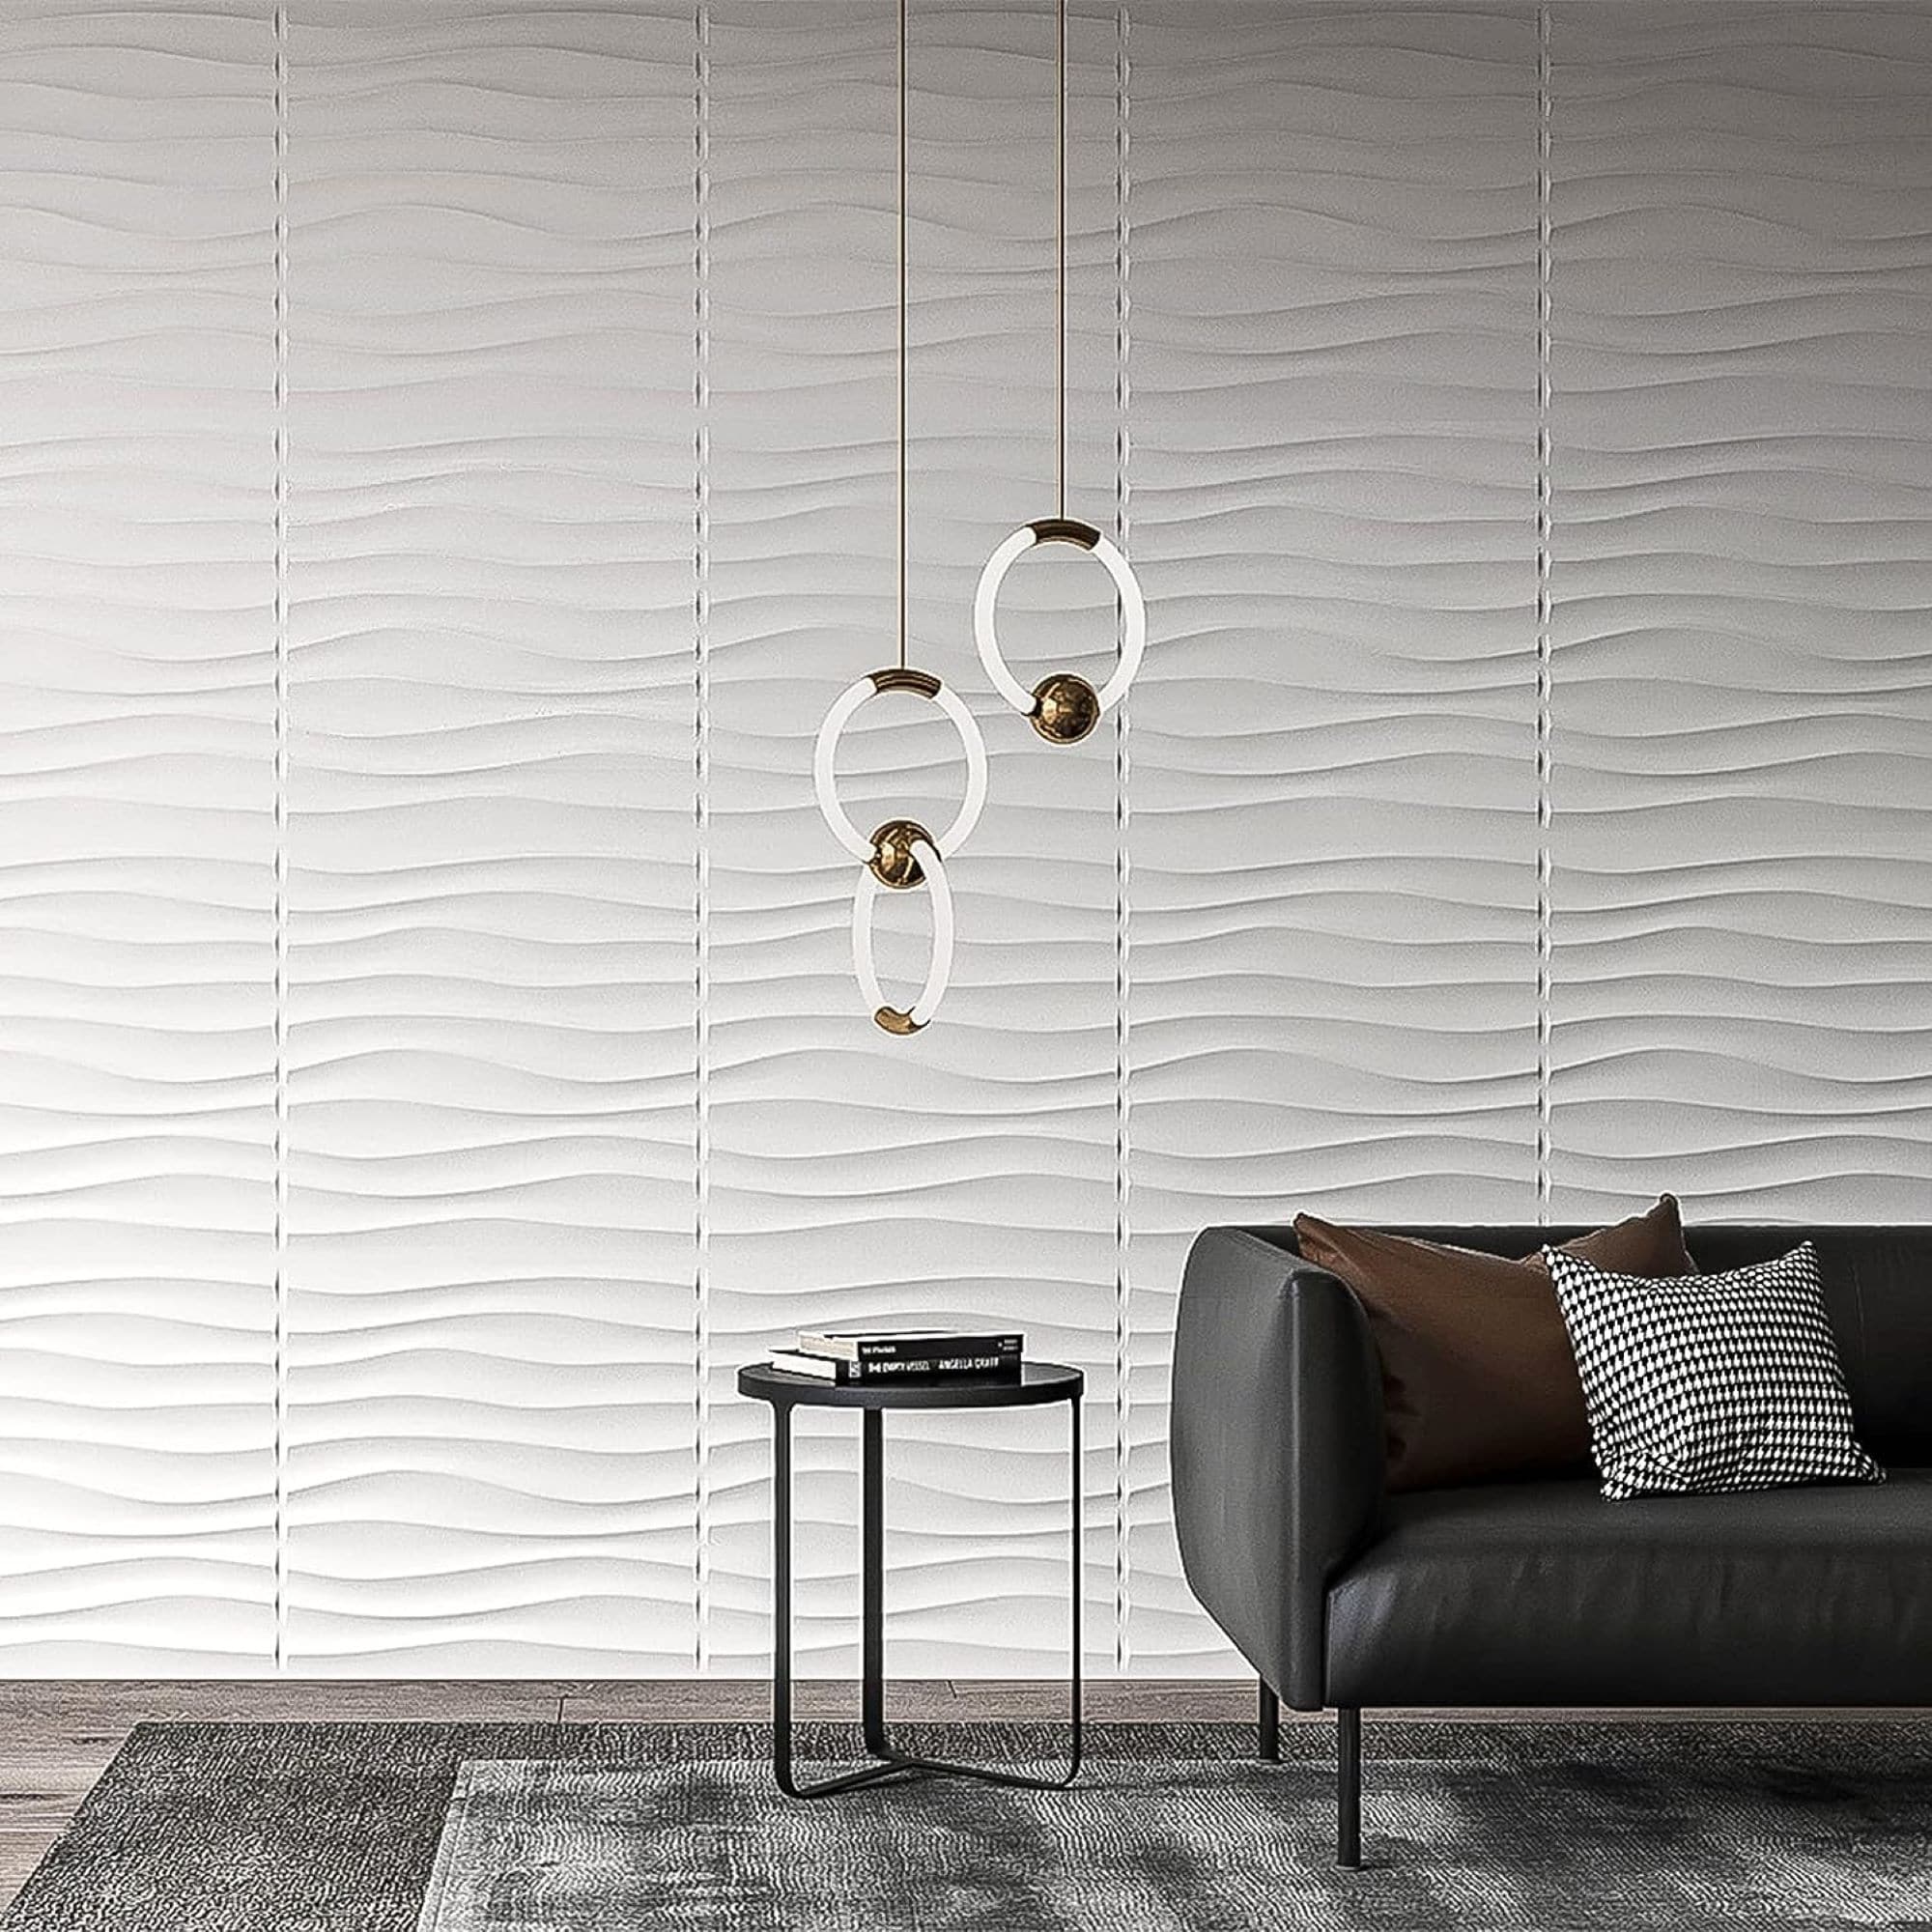 Art3d Decorative 3D Wall Panels Textured 3D Wall Covering, White, 12 Tiles 32 Sq ft